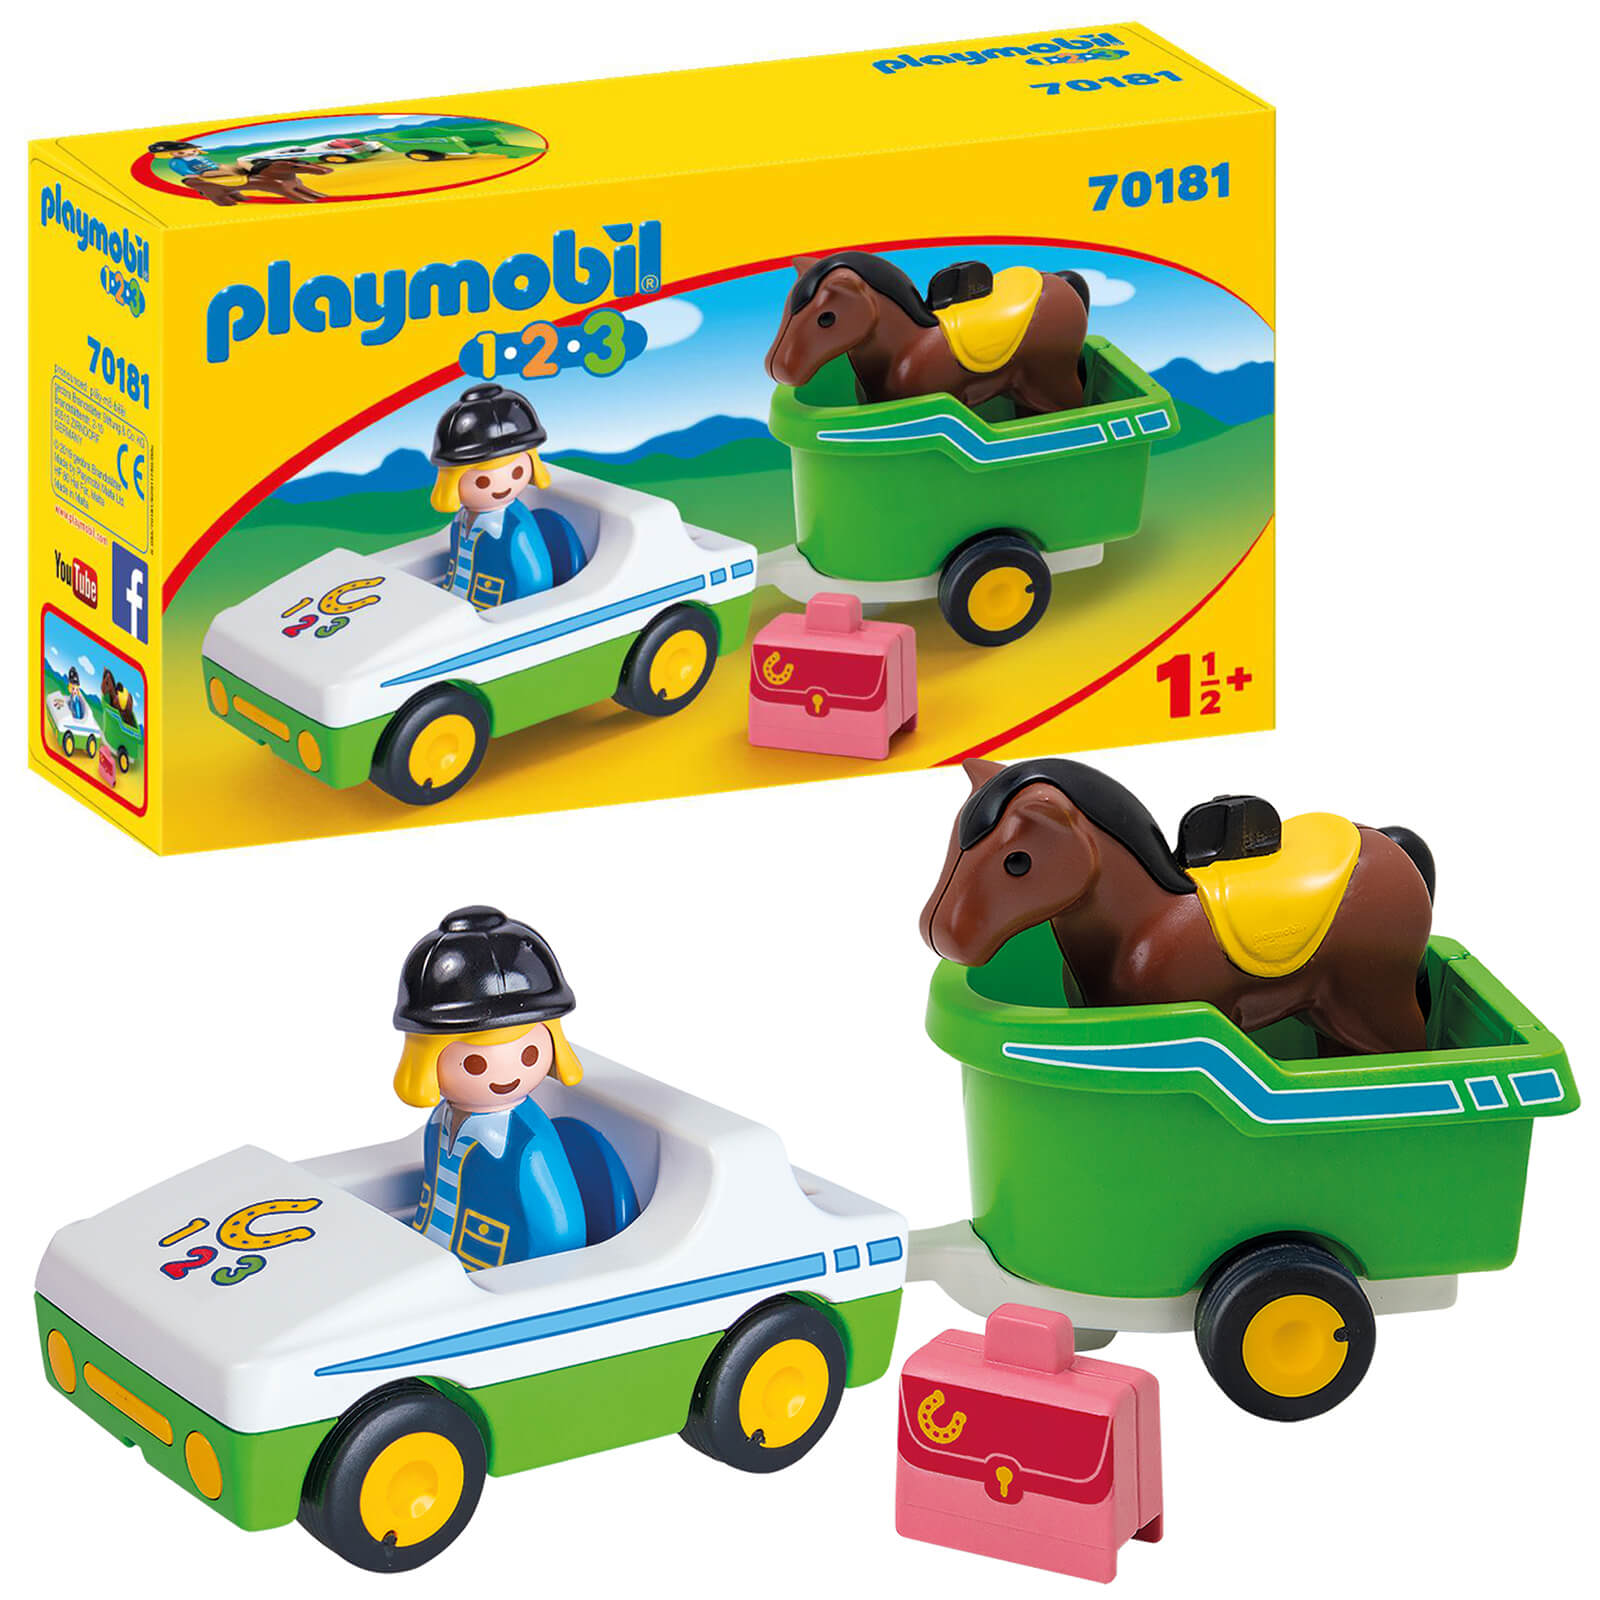 Playmobil 1.2.3 Car with Horse Trailer for Children 18 Months+ (70181)